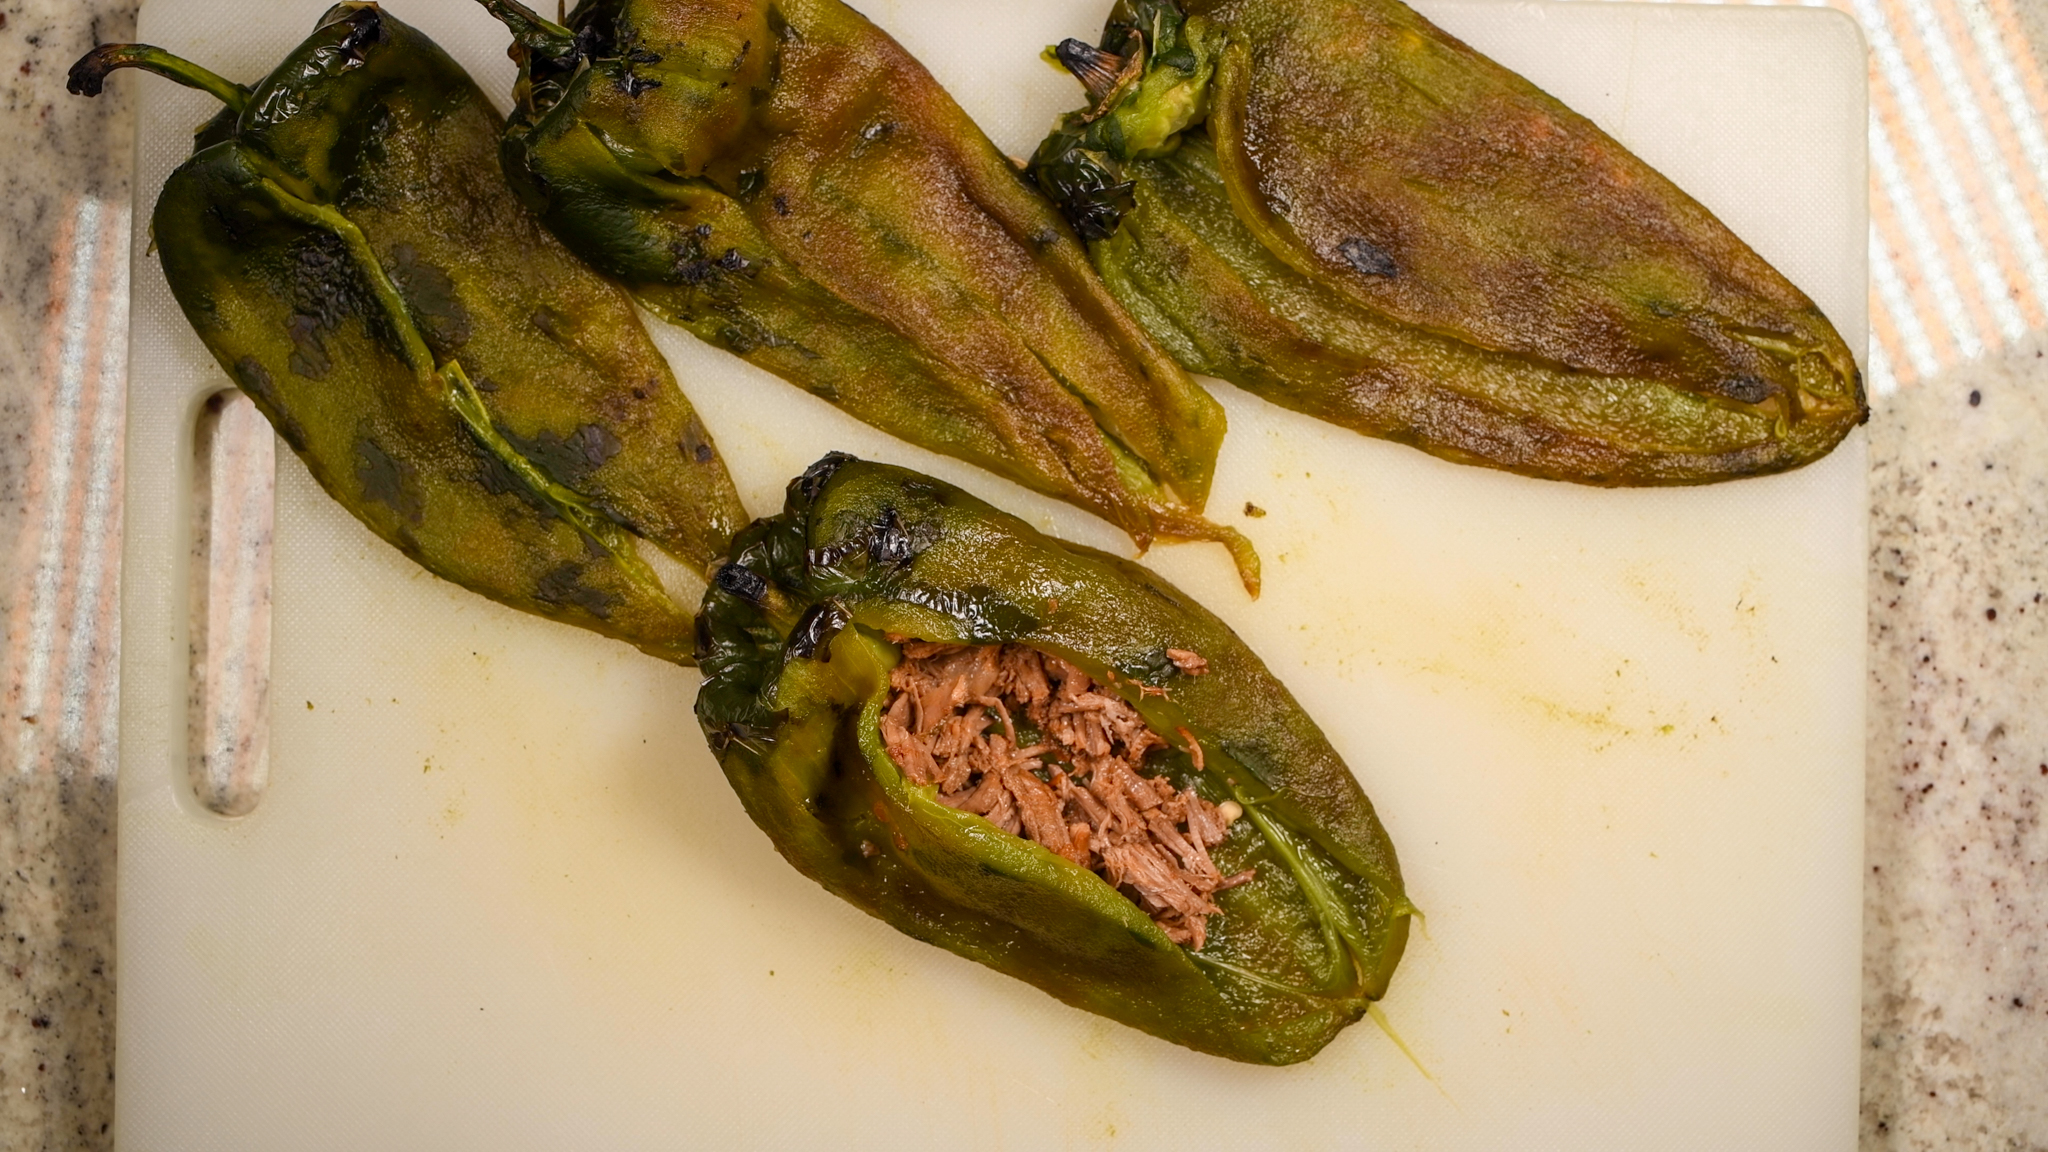 Place a heaping tablespoon of brisket inside each pepper.